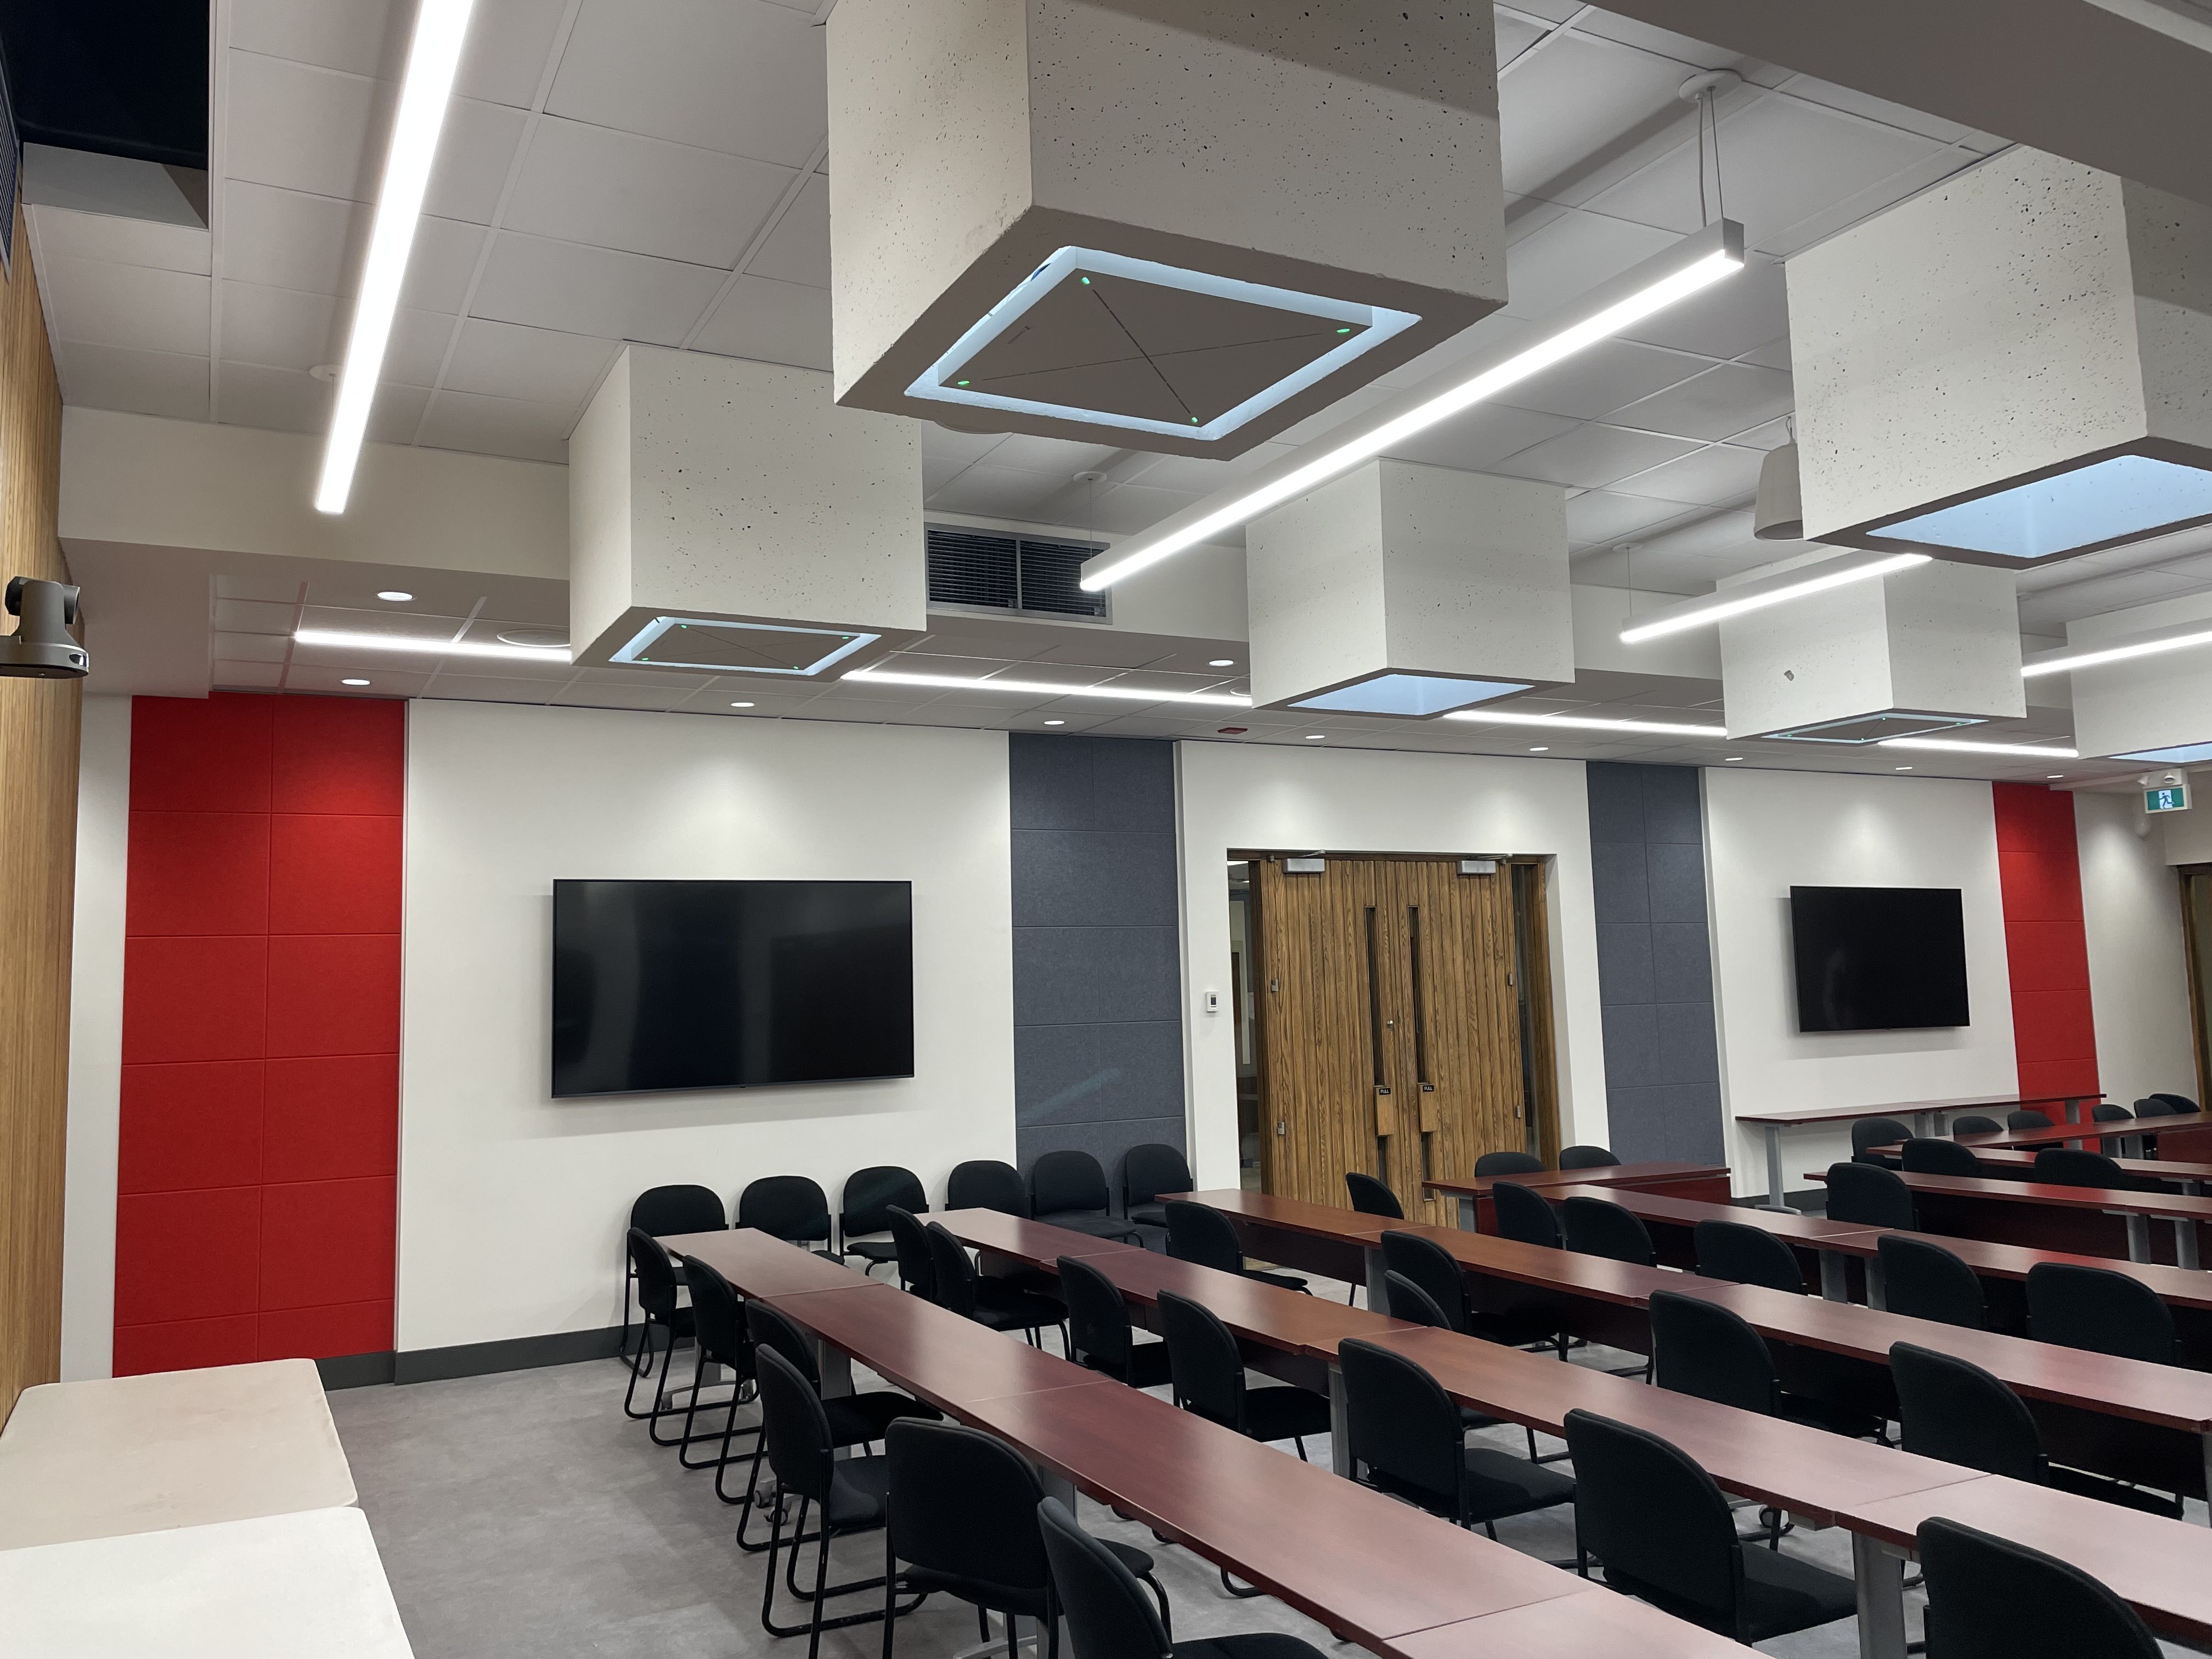 The recently renovated Senate Room at Carleton University features six Sennheiser TeamConnect Ceiling 2 microphones throughout.